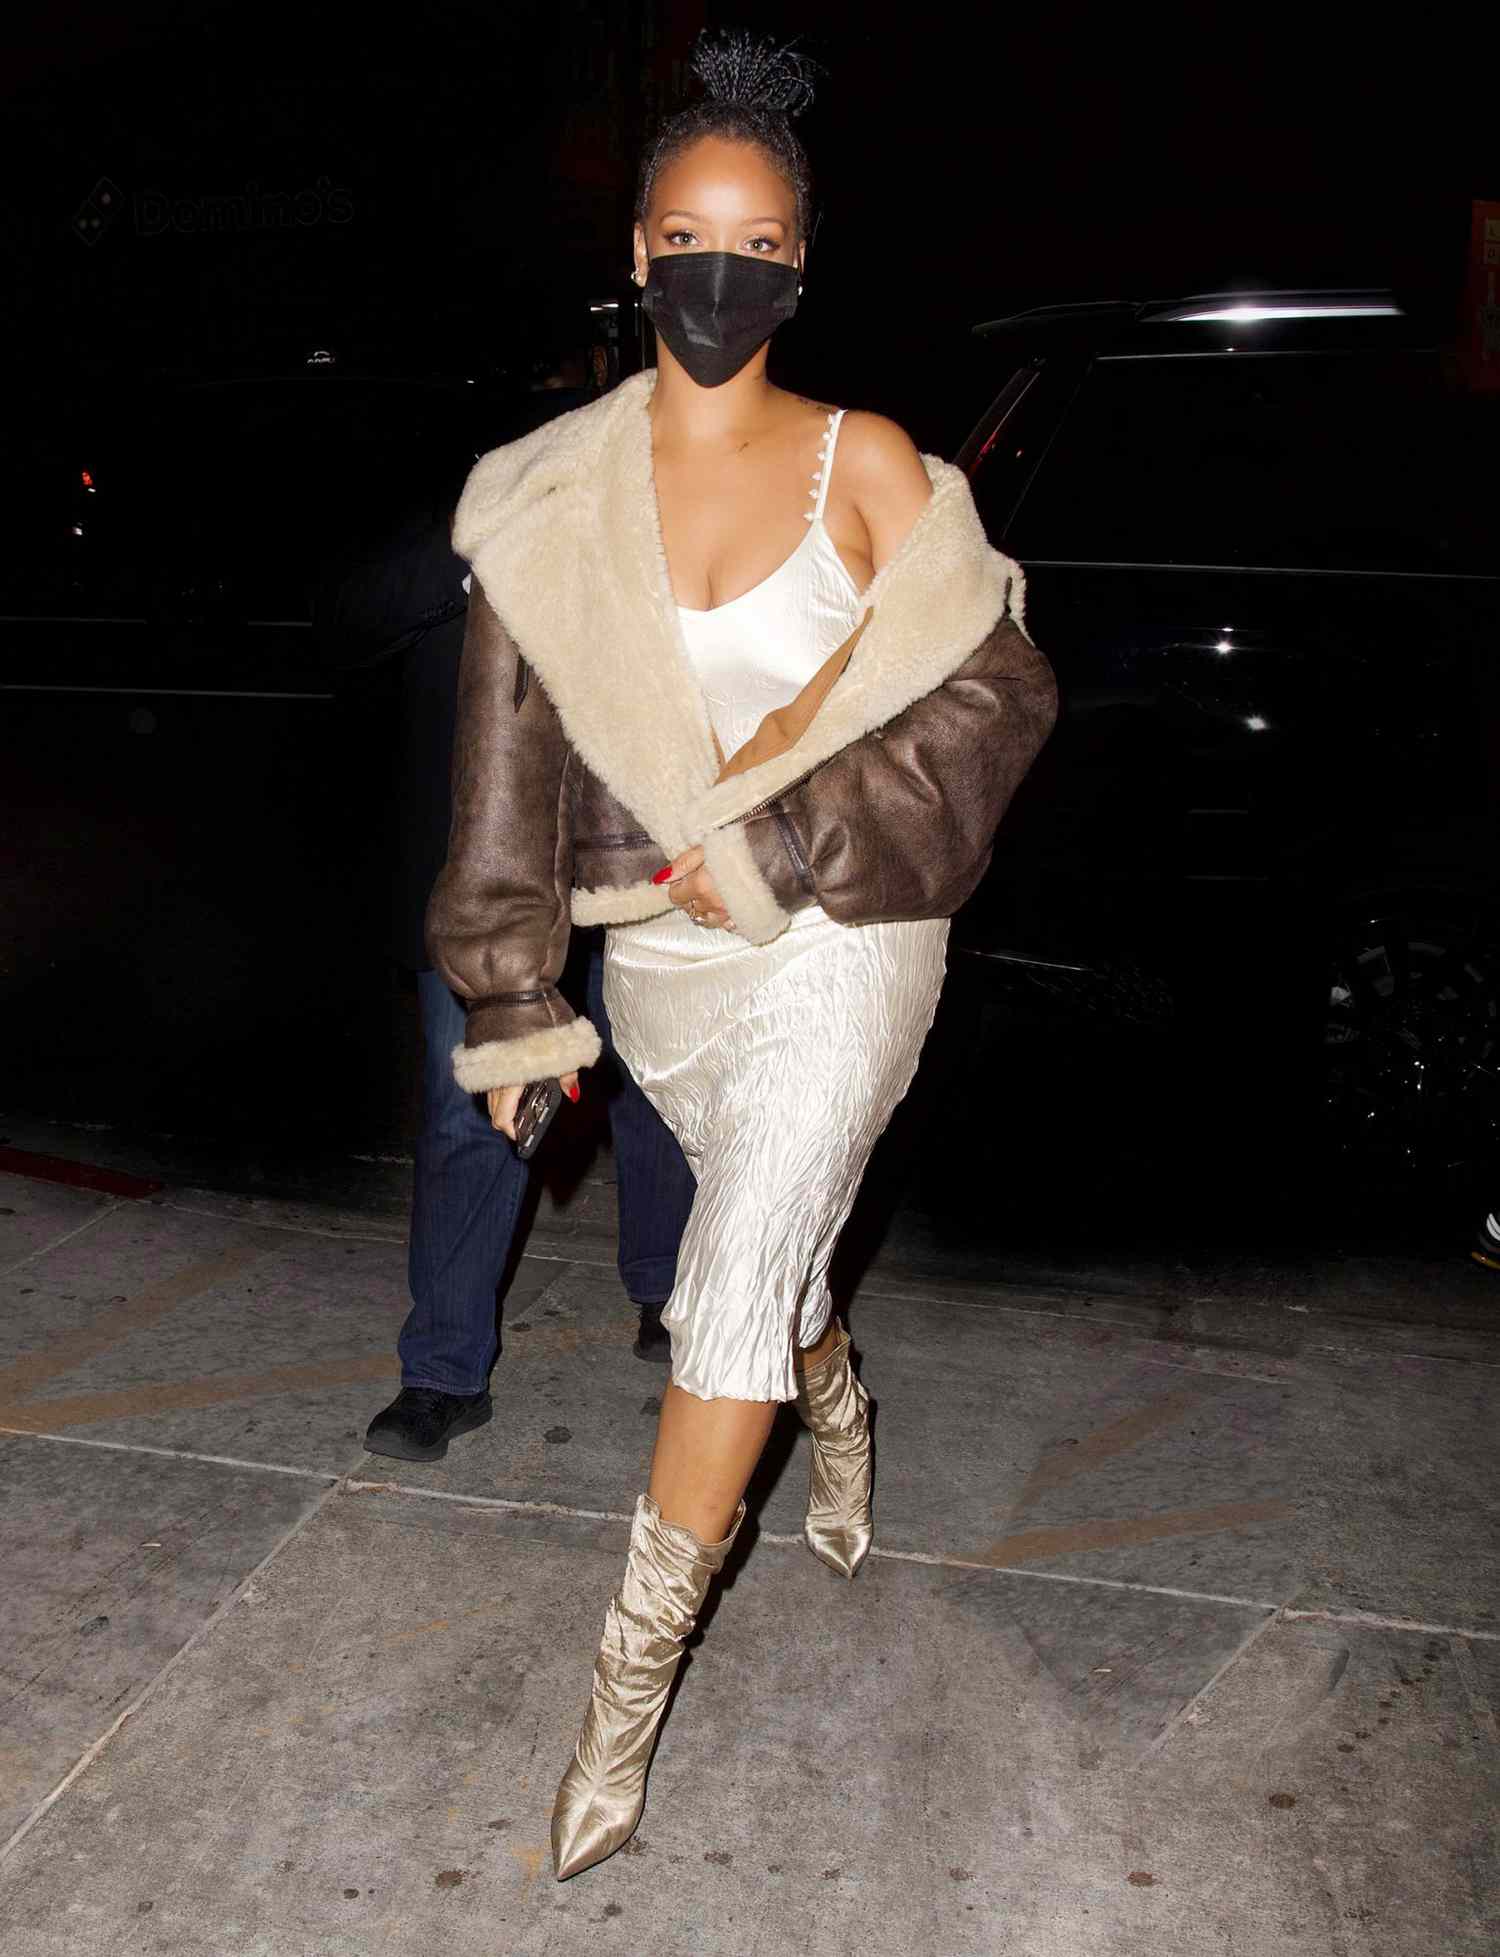 Rihanna Stuns in Satin Dress as She Steps Out for Dinner in Los Angeles